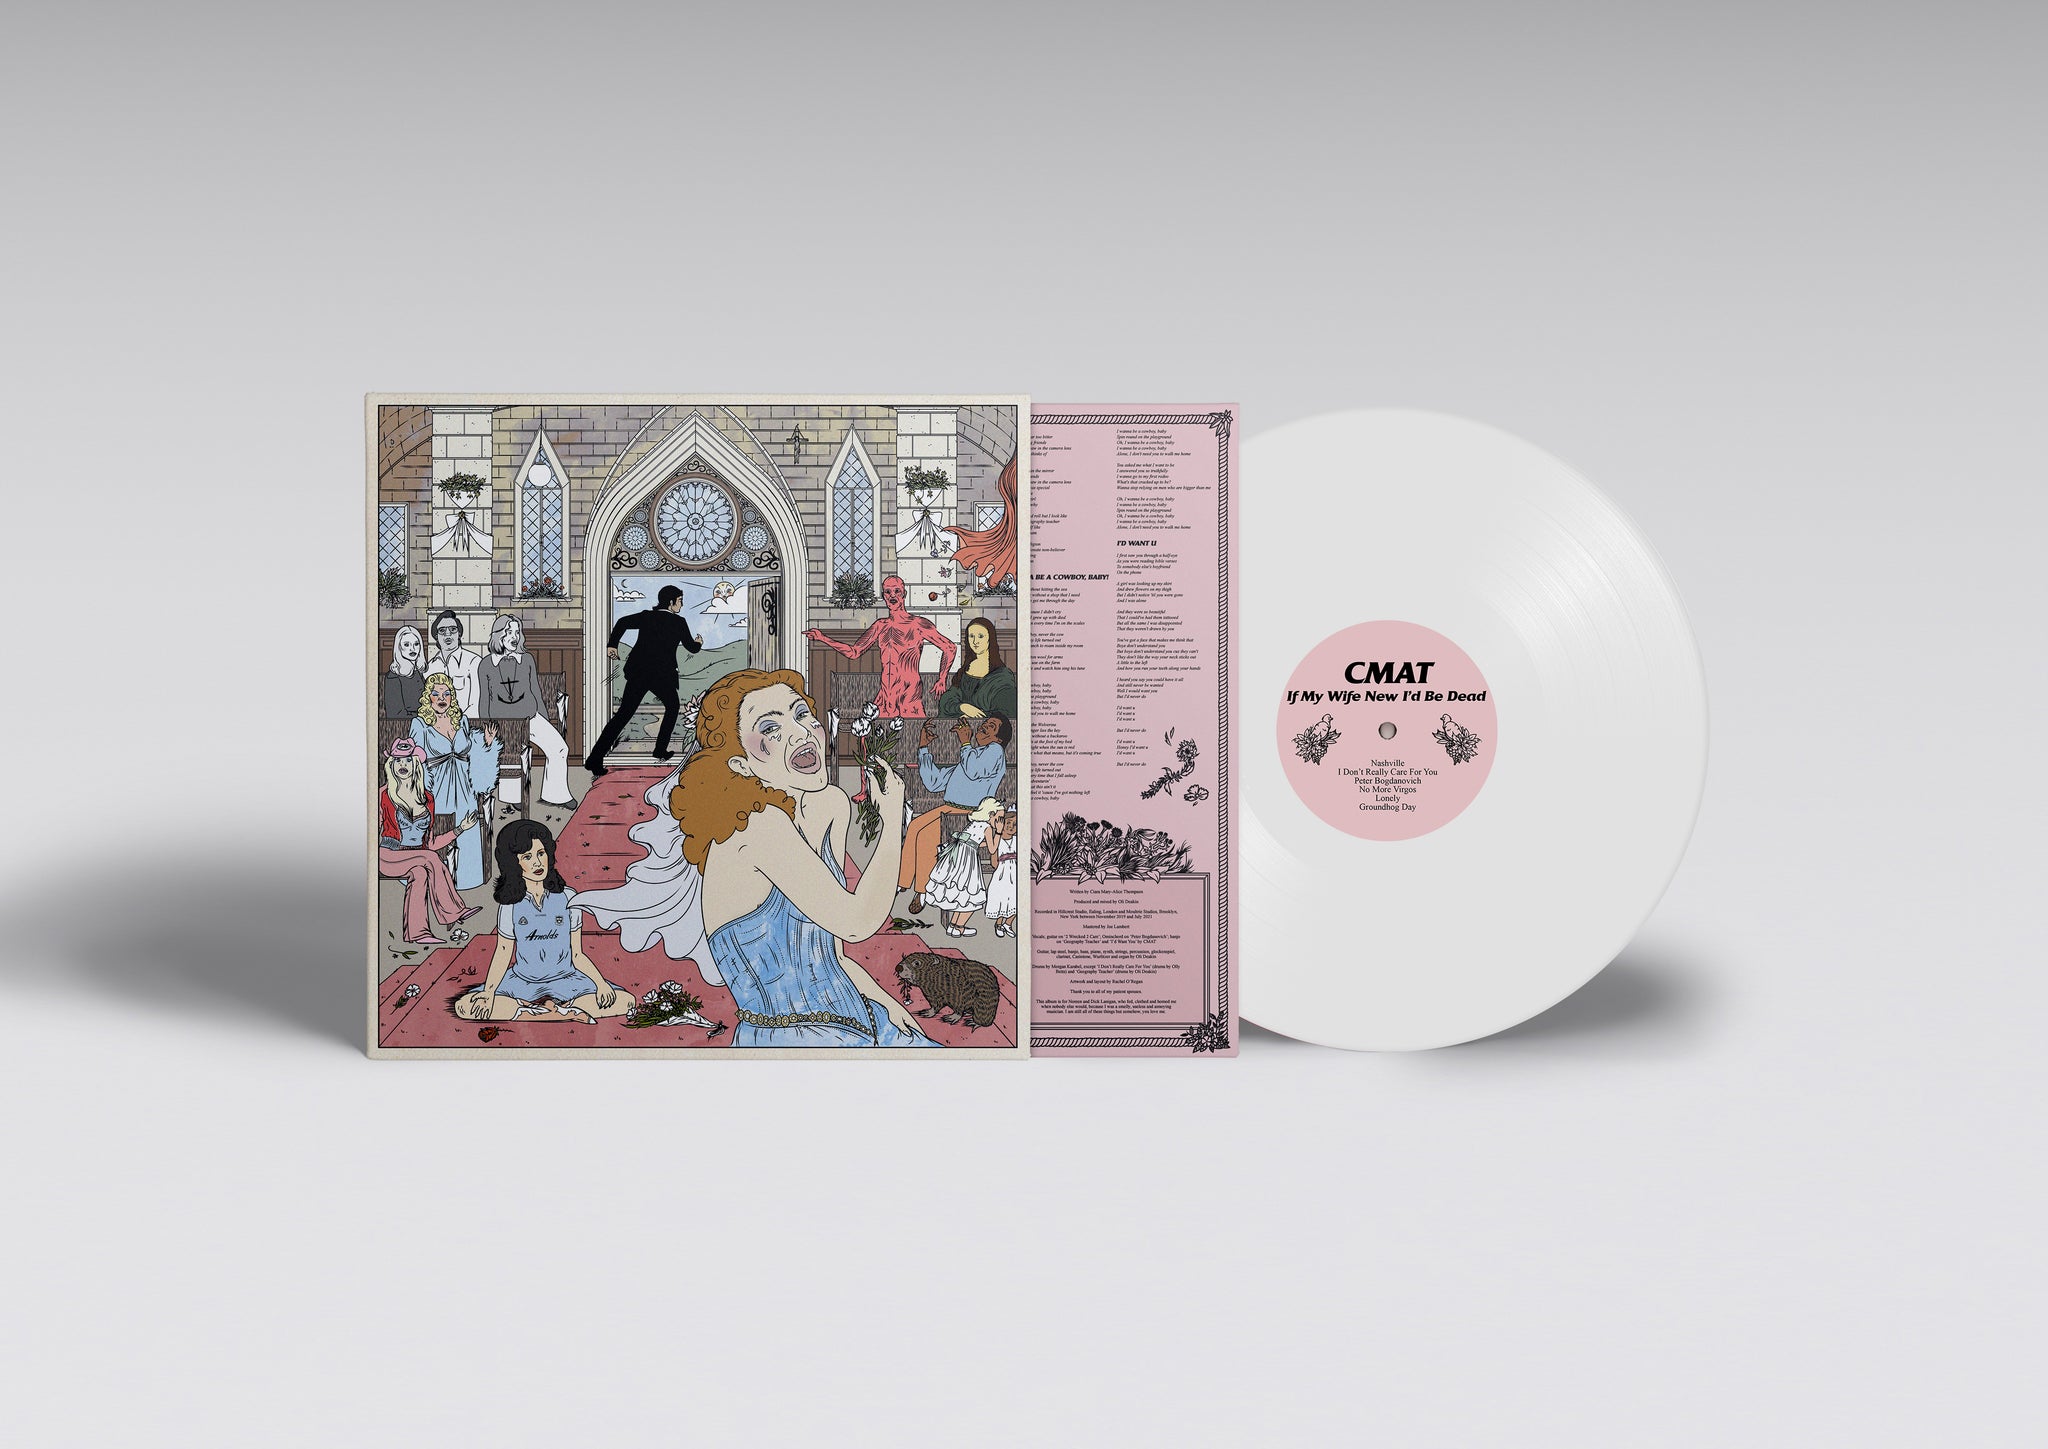 CMAT - If My Wife New I’d Be Dead (Repress) - LP - White Vinyl